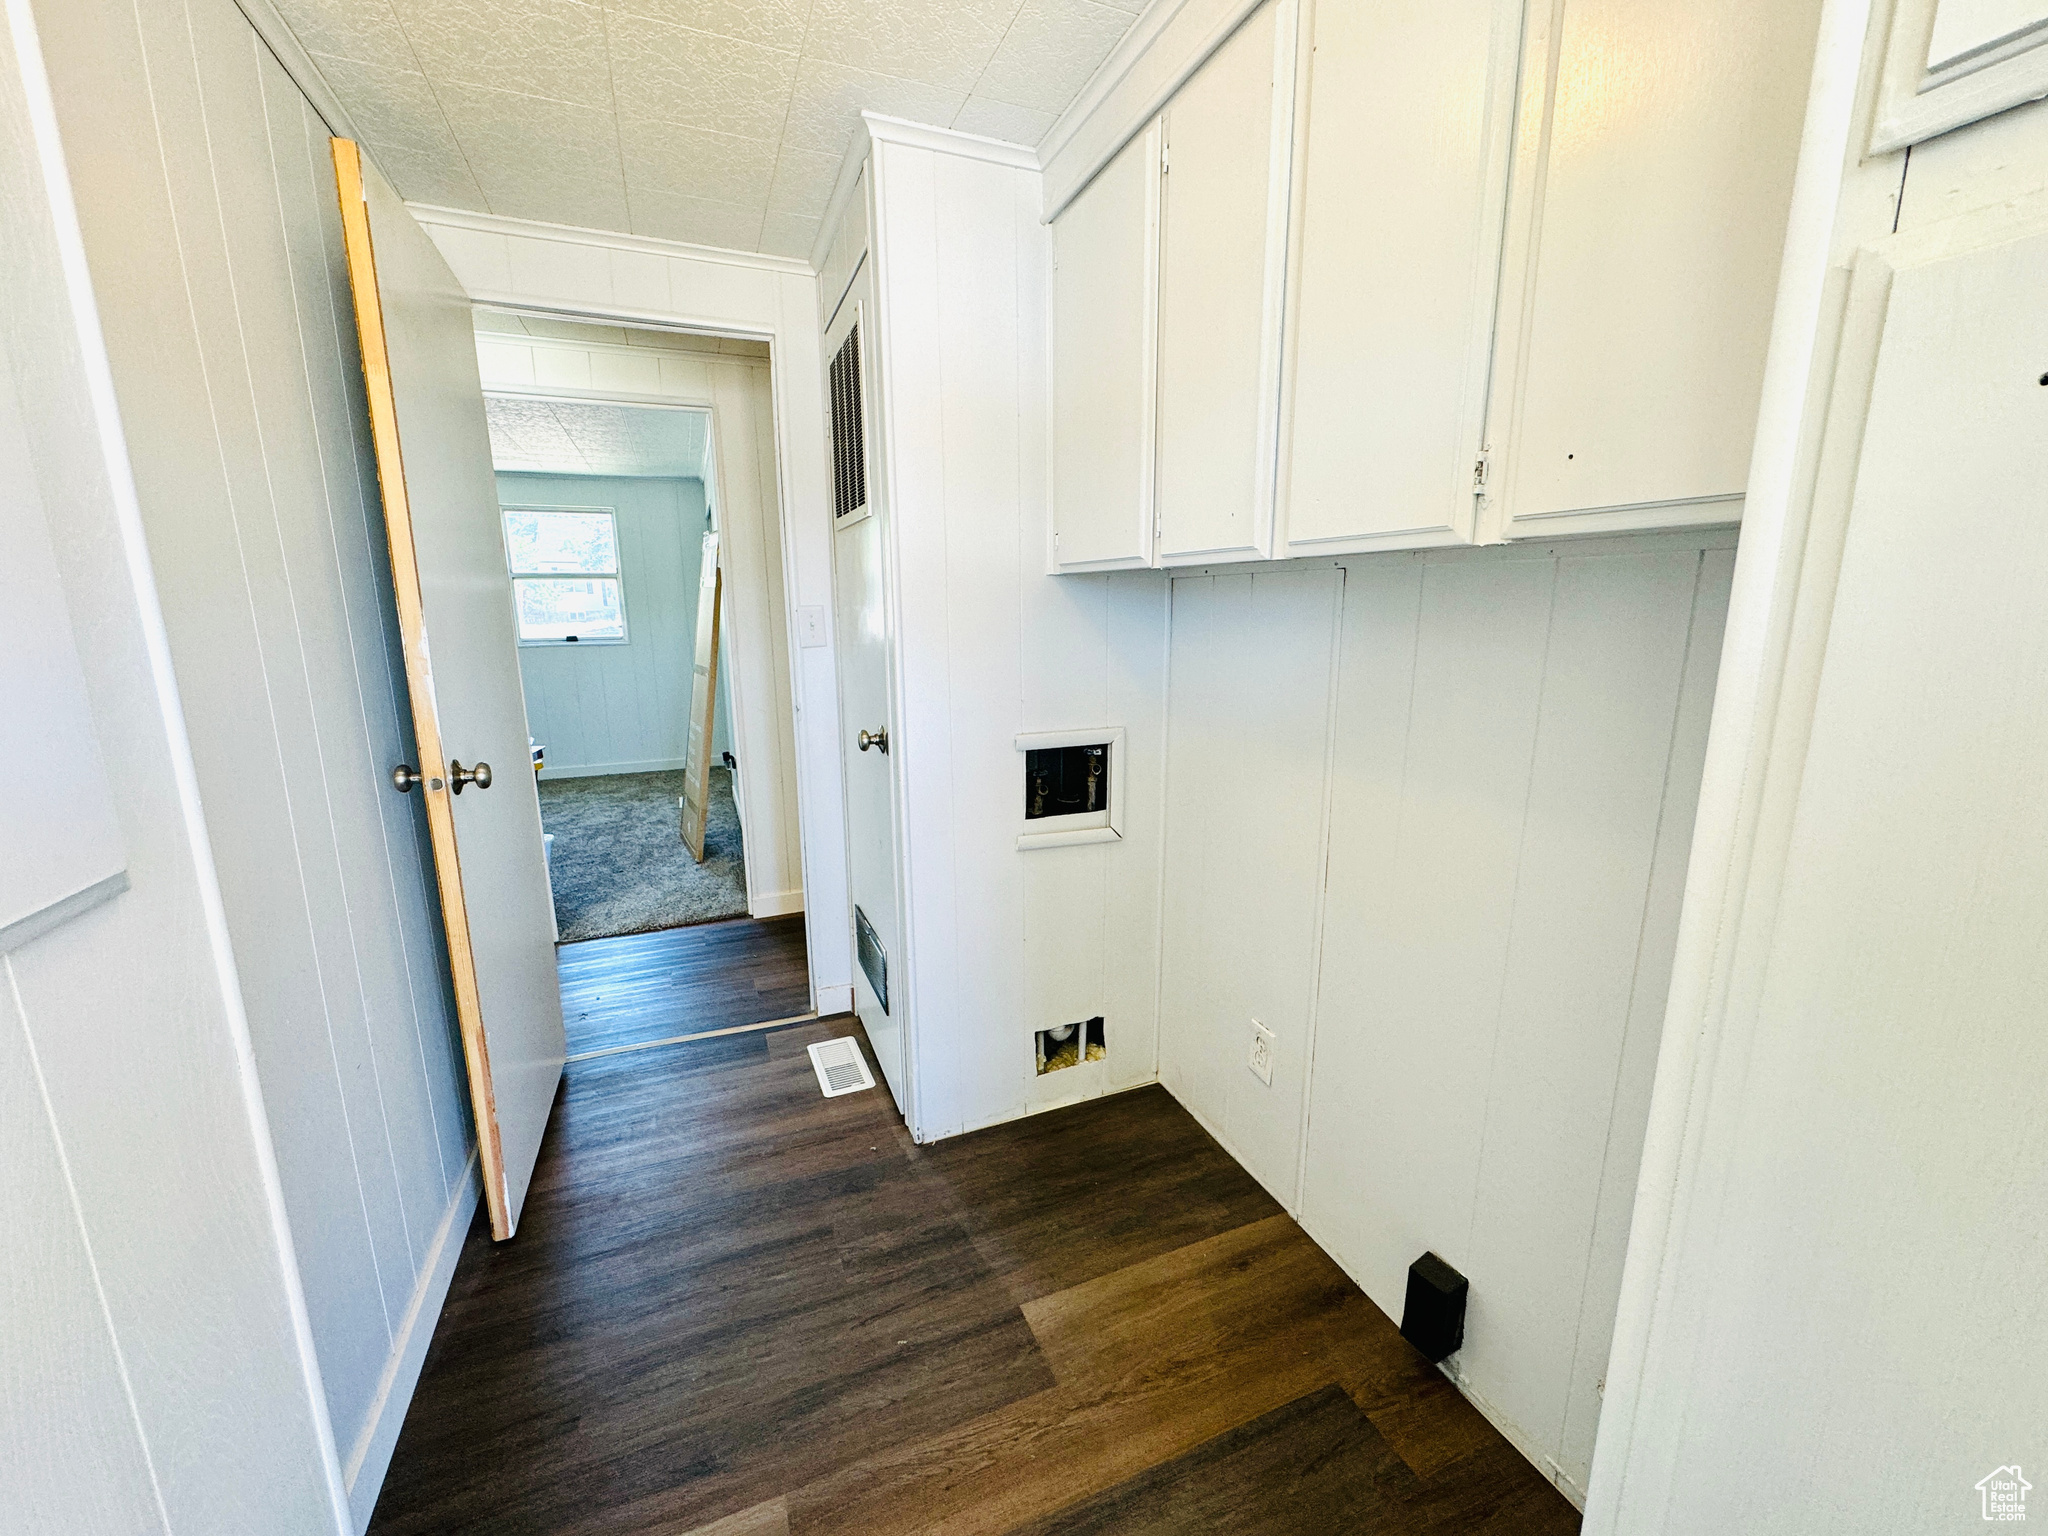 Laundry room with dark wood-type flooring, cabinets, and washer hookup